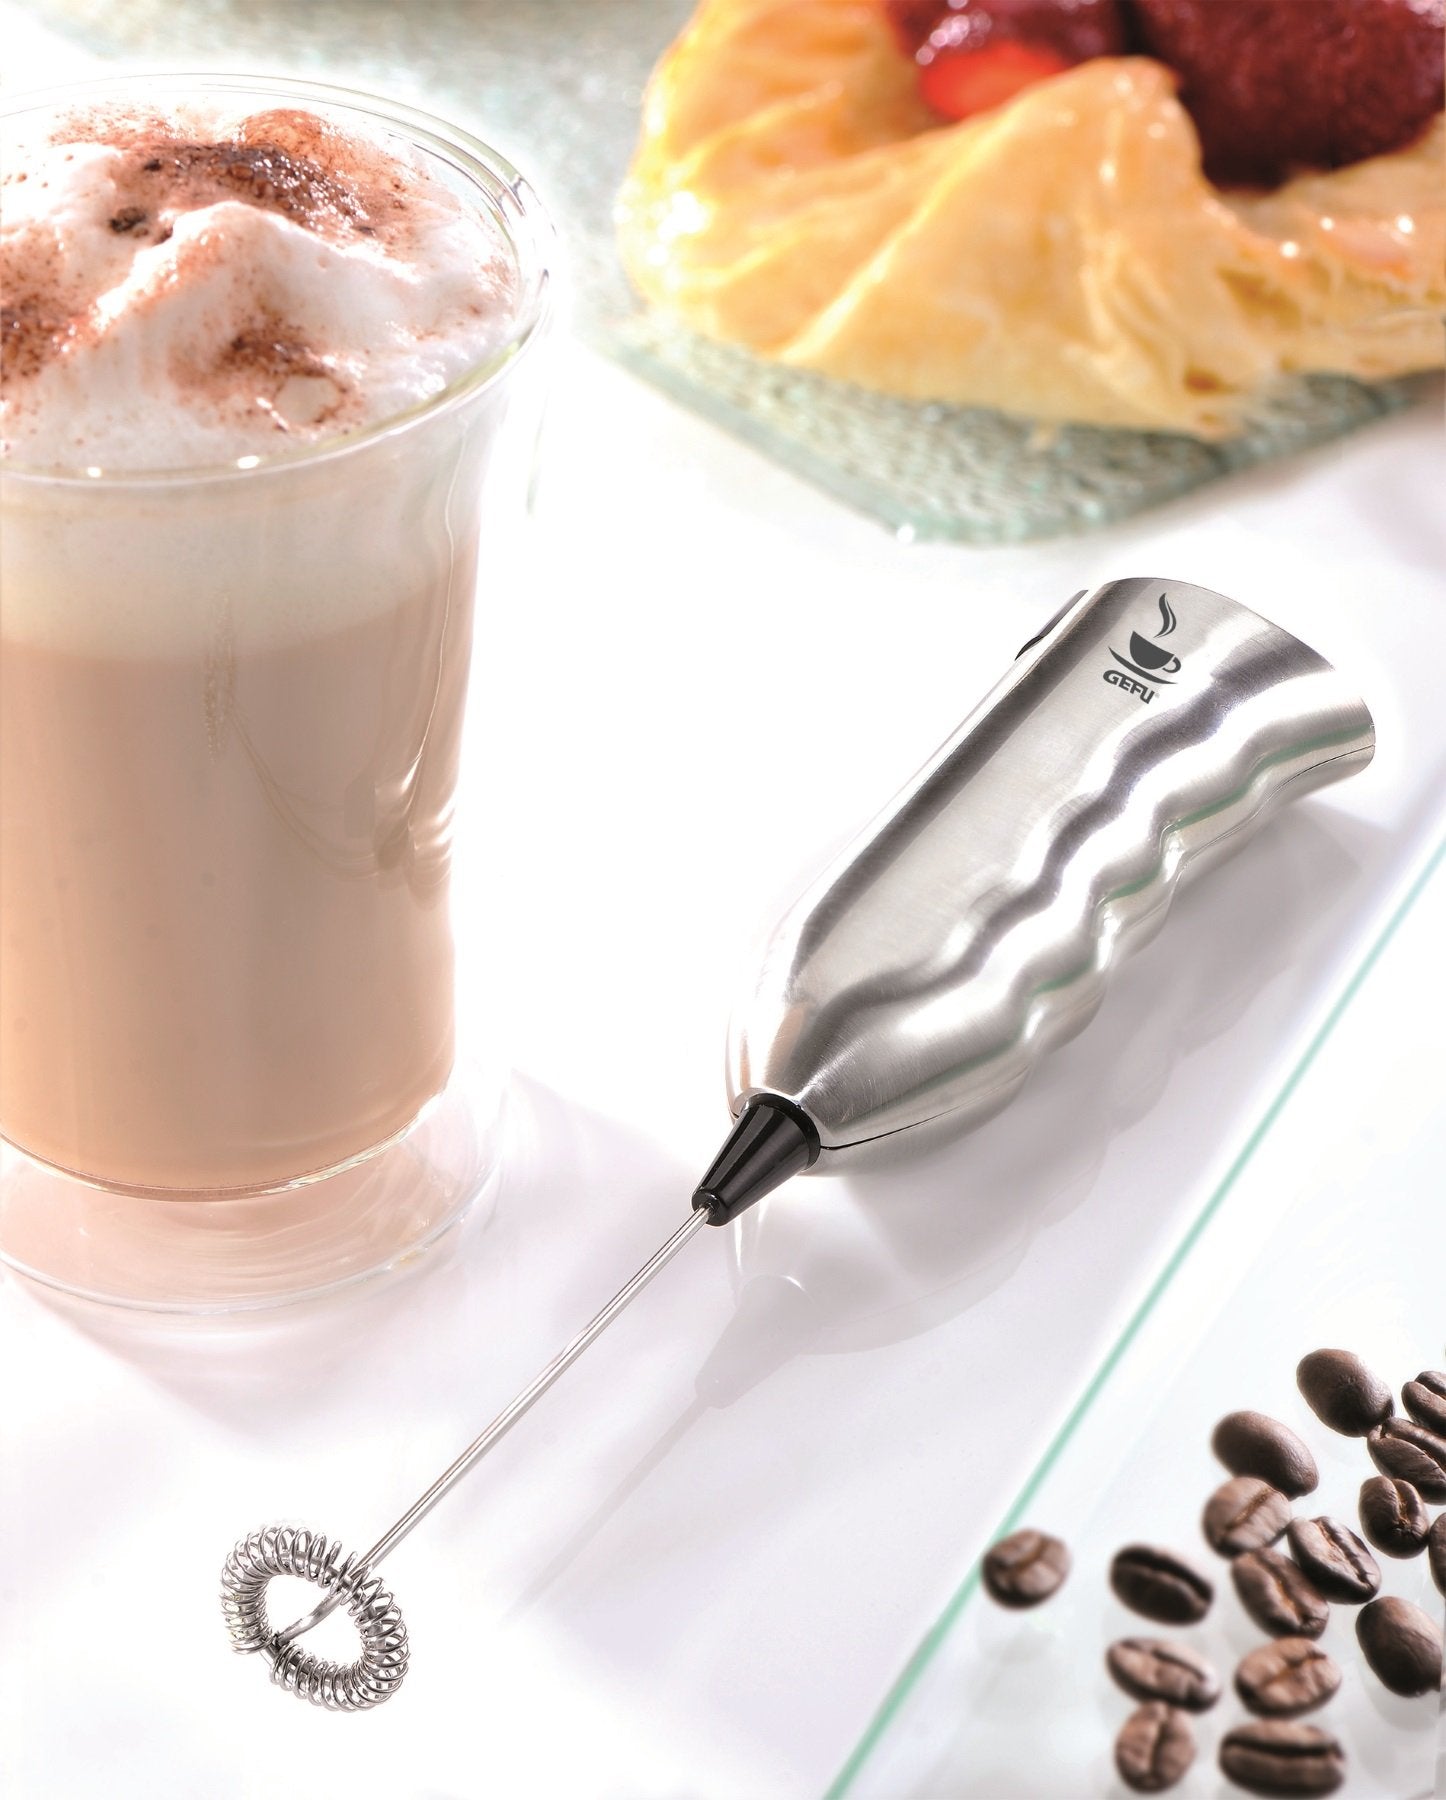 GEFU Milk Frother Marcello - Whole and All